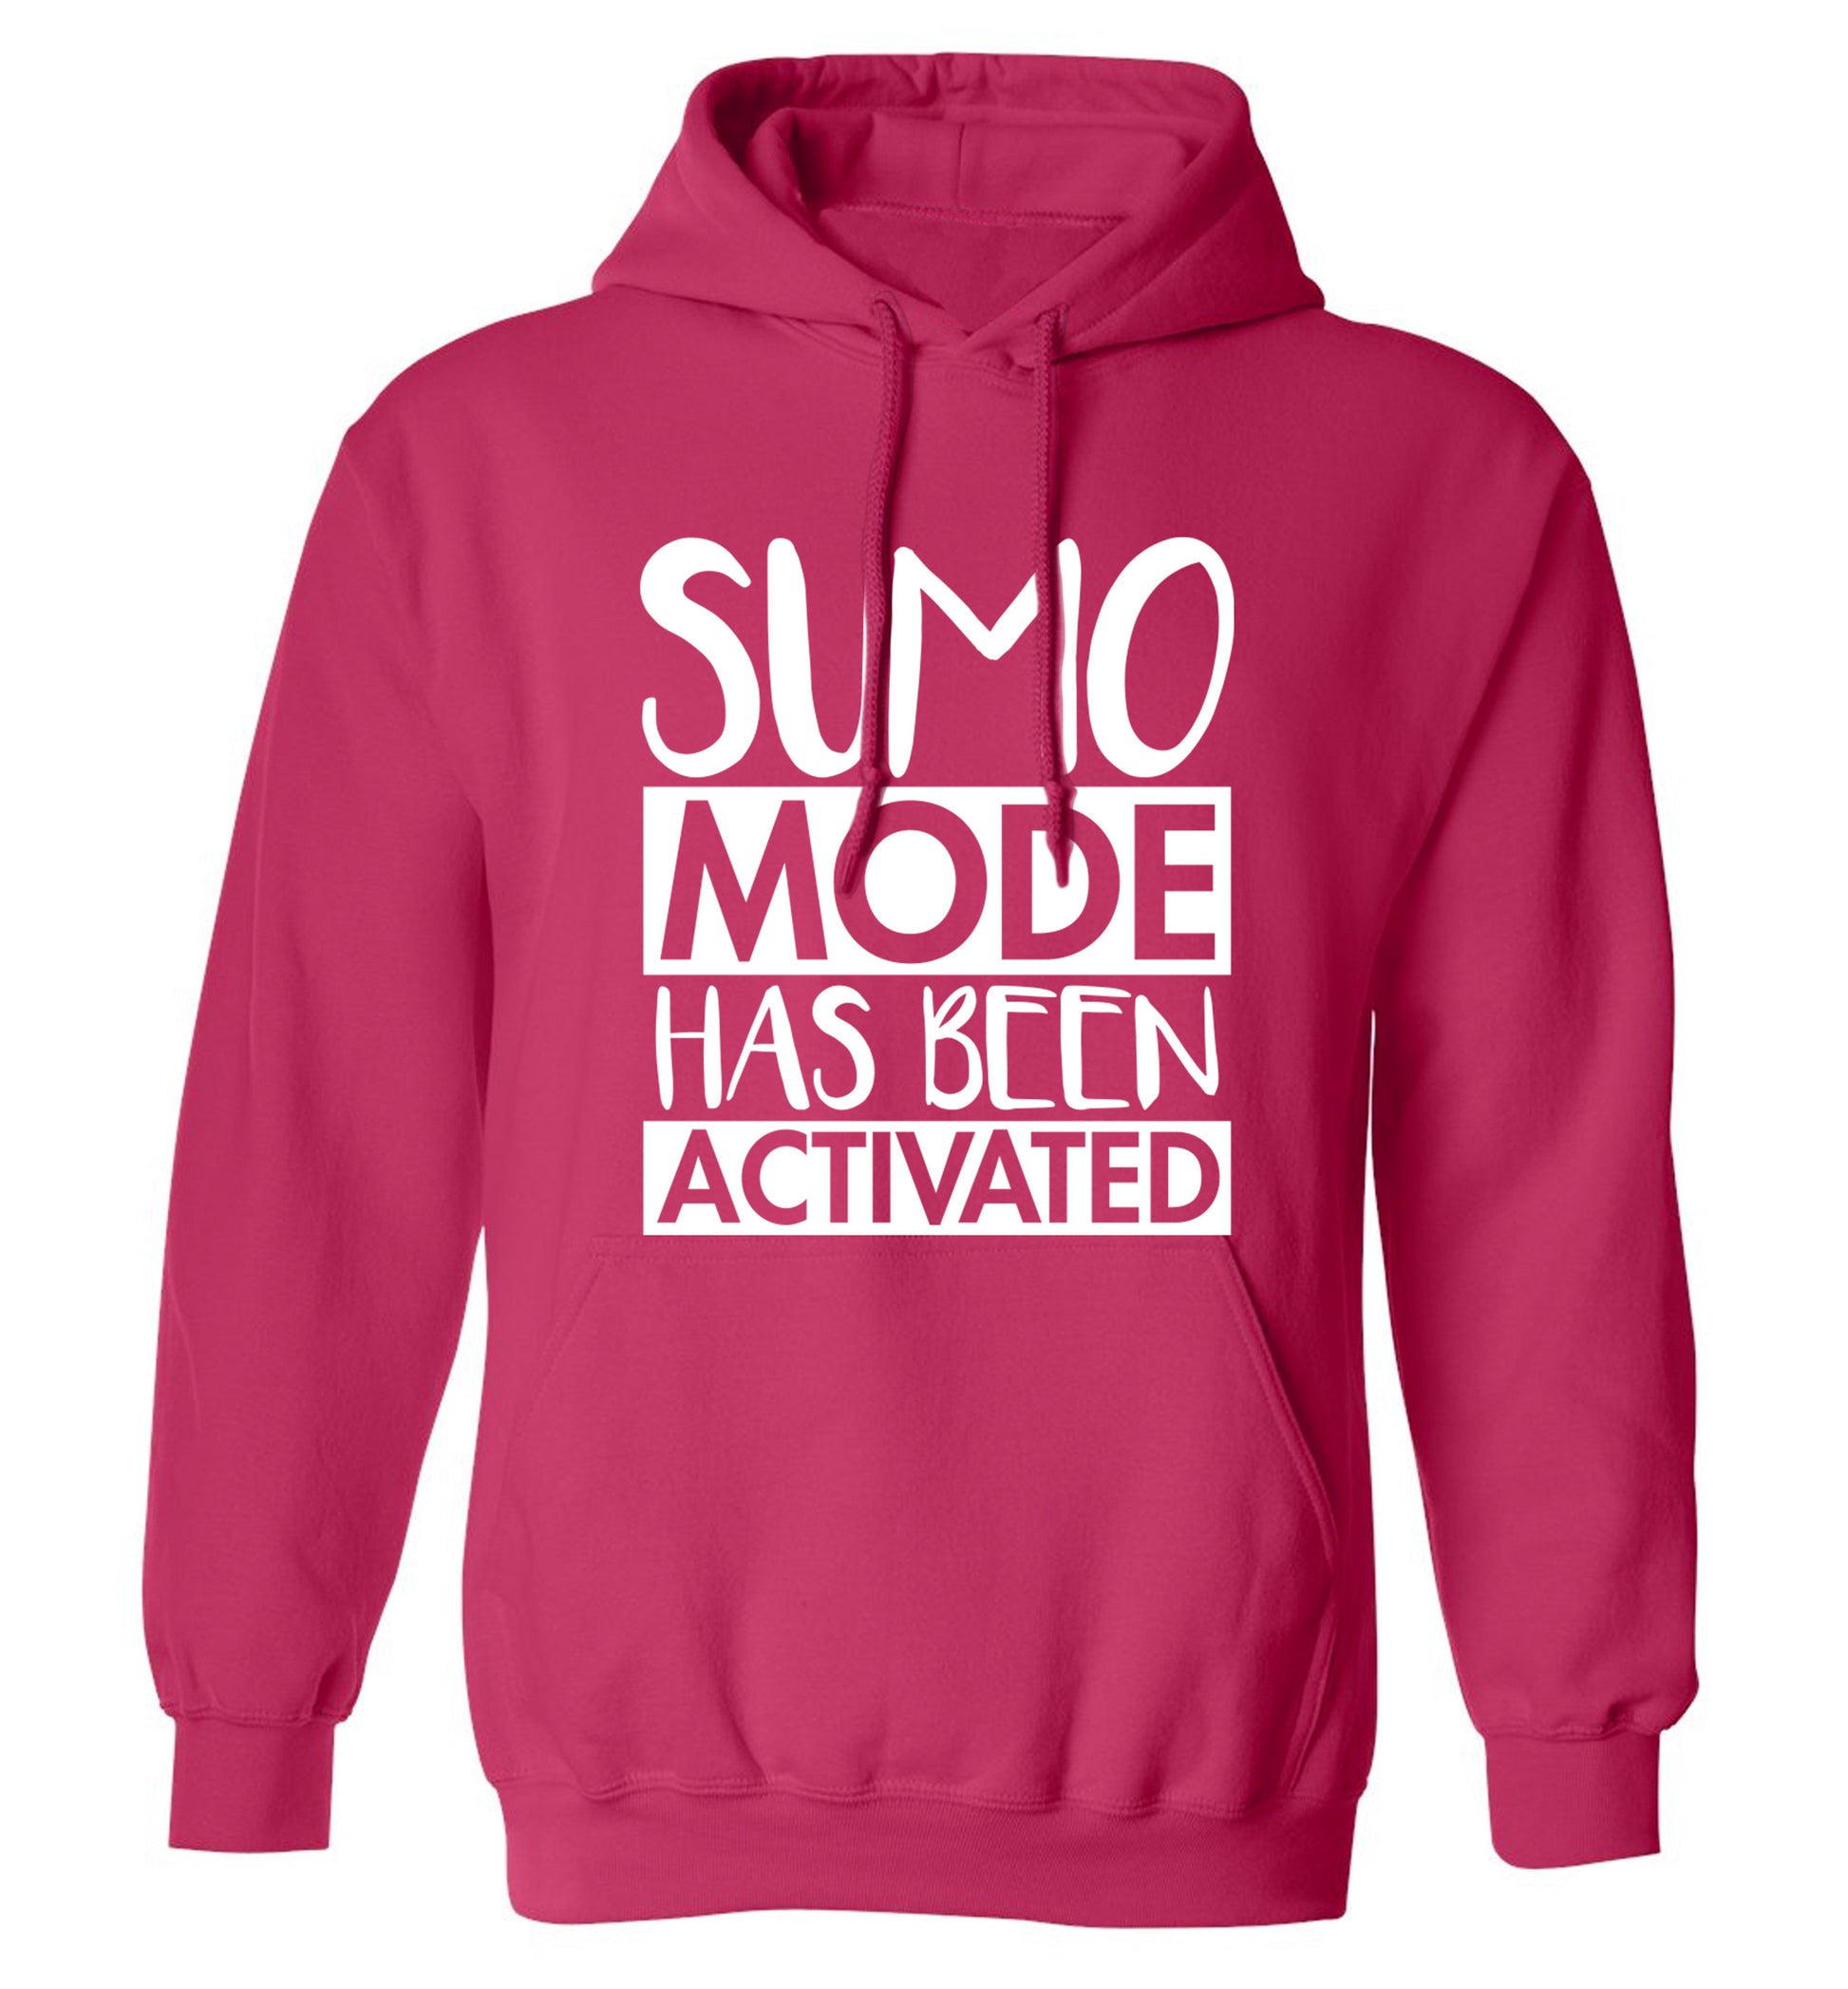 Sumo mode activated adults unisex pink hoodie 2XL